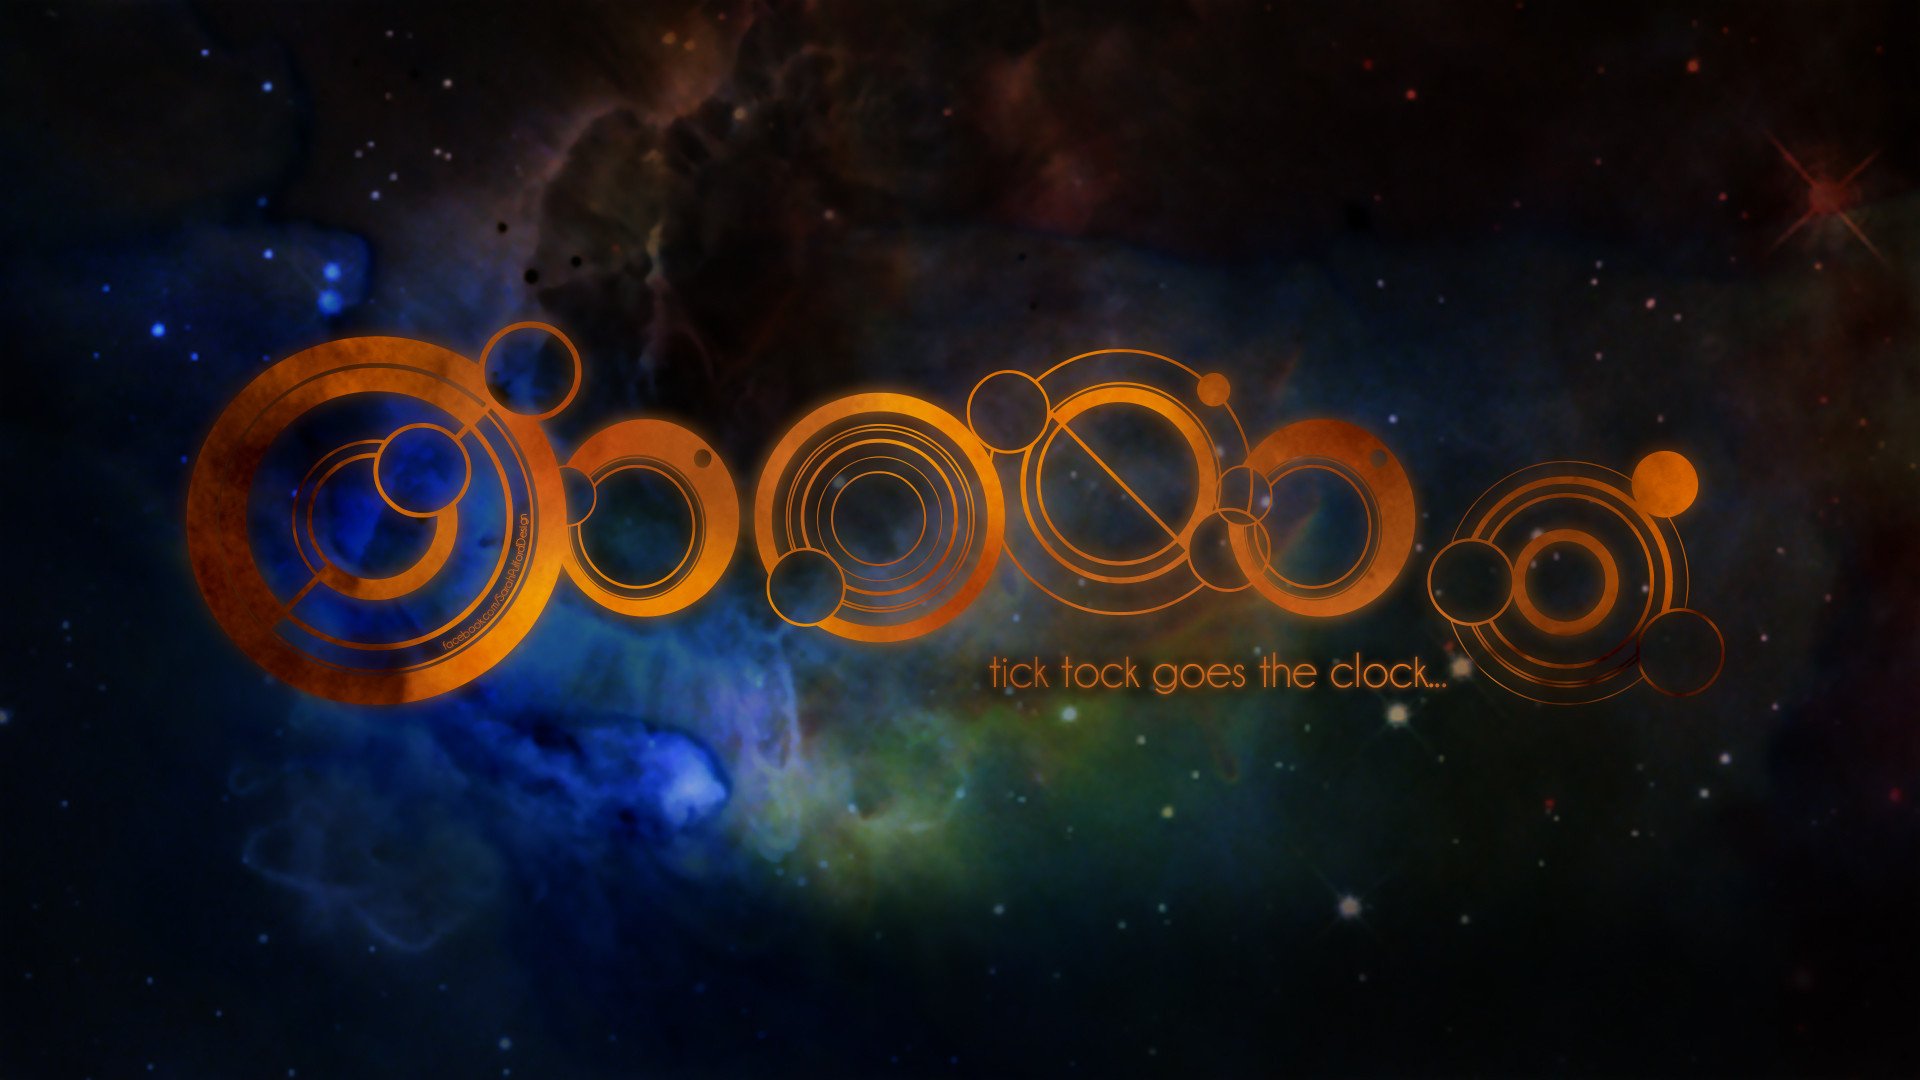 Doctor Who Wallpaper » WallDevil - Best free HD desktop and mobile ...